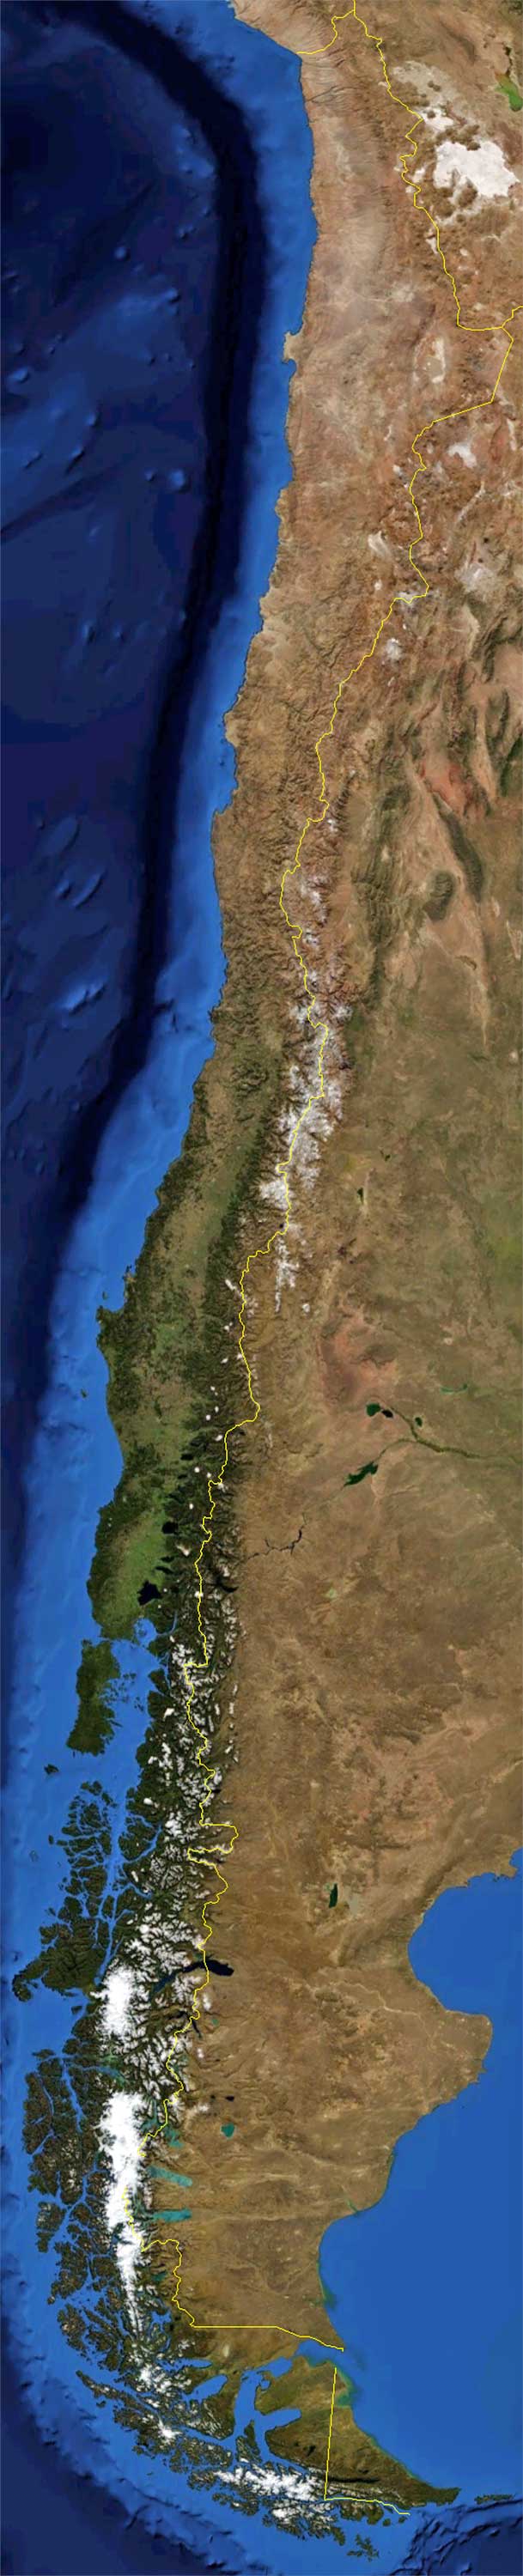 Chile Earth Satellite Map